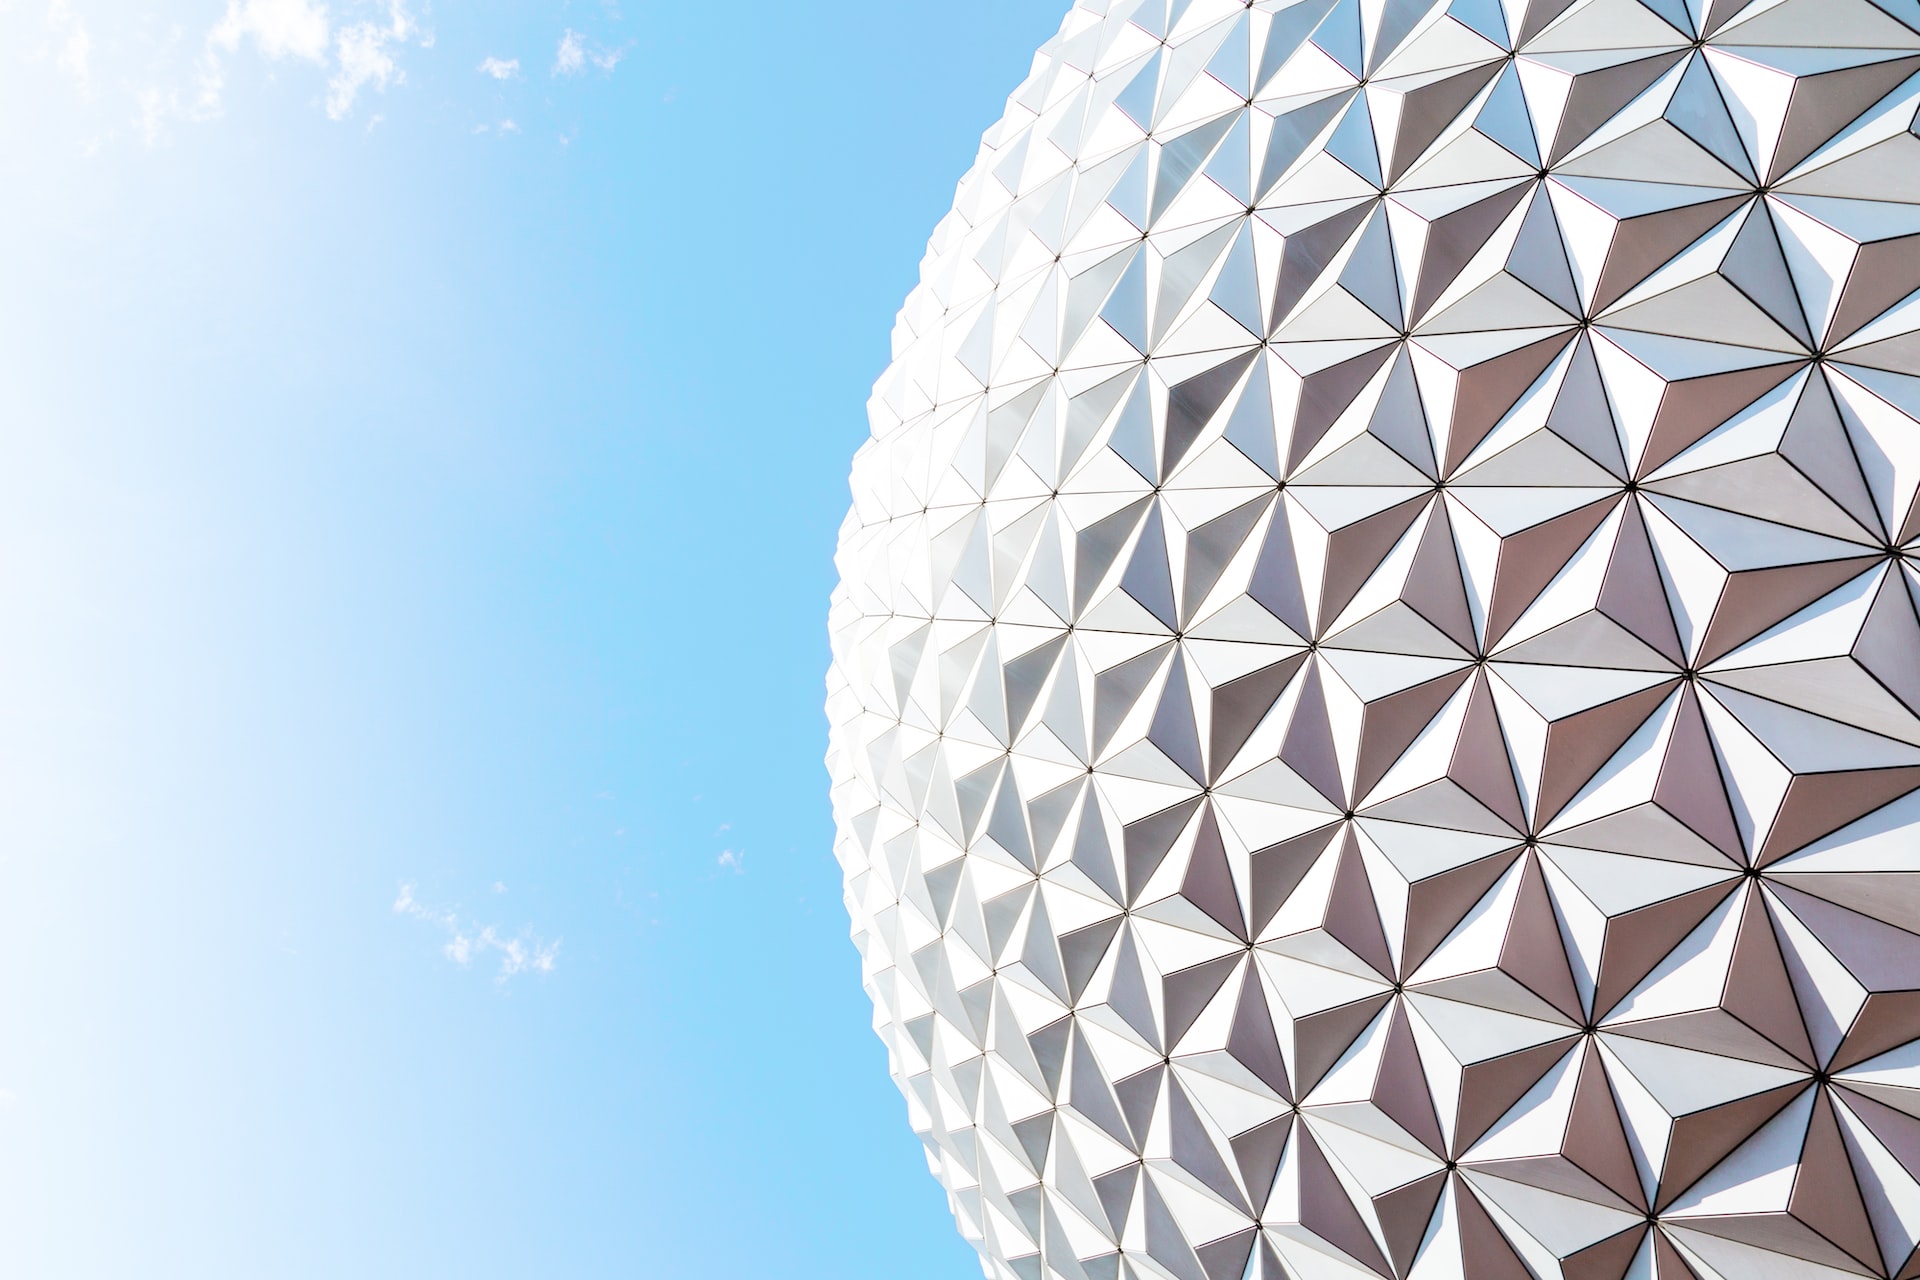 A close-up shot of the giant sphere at Epcot.